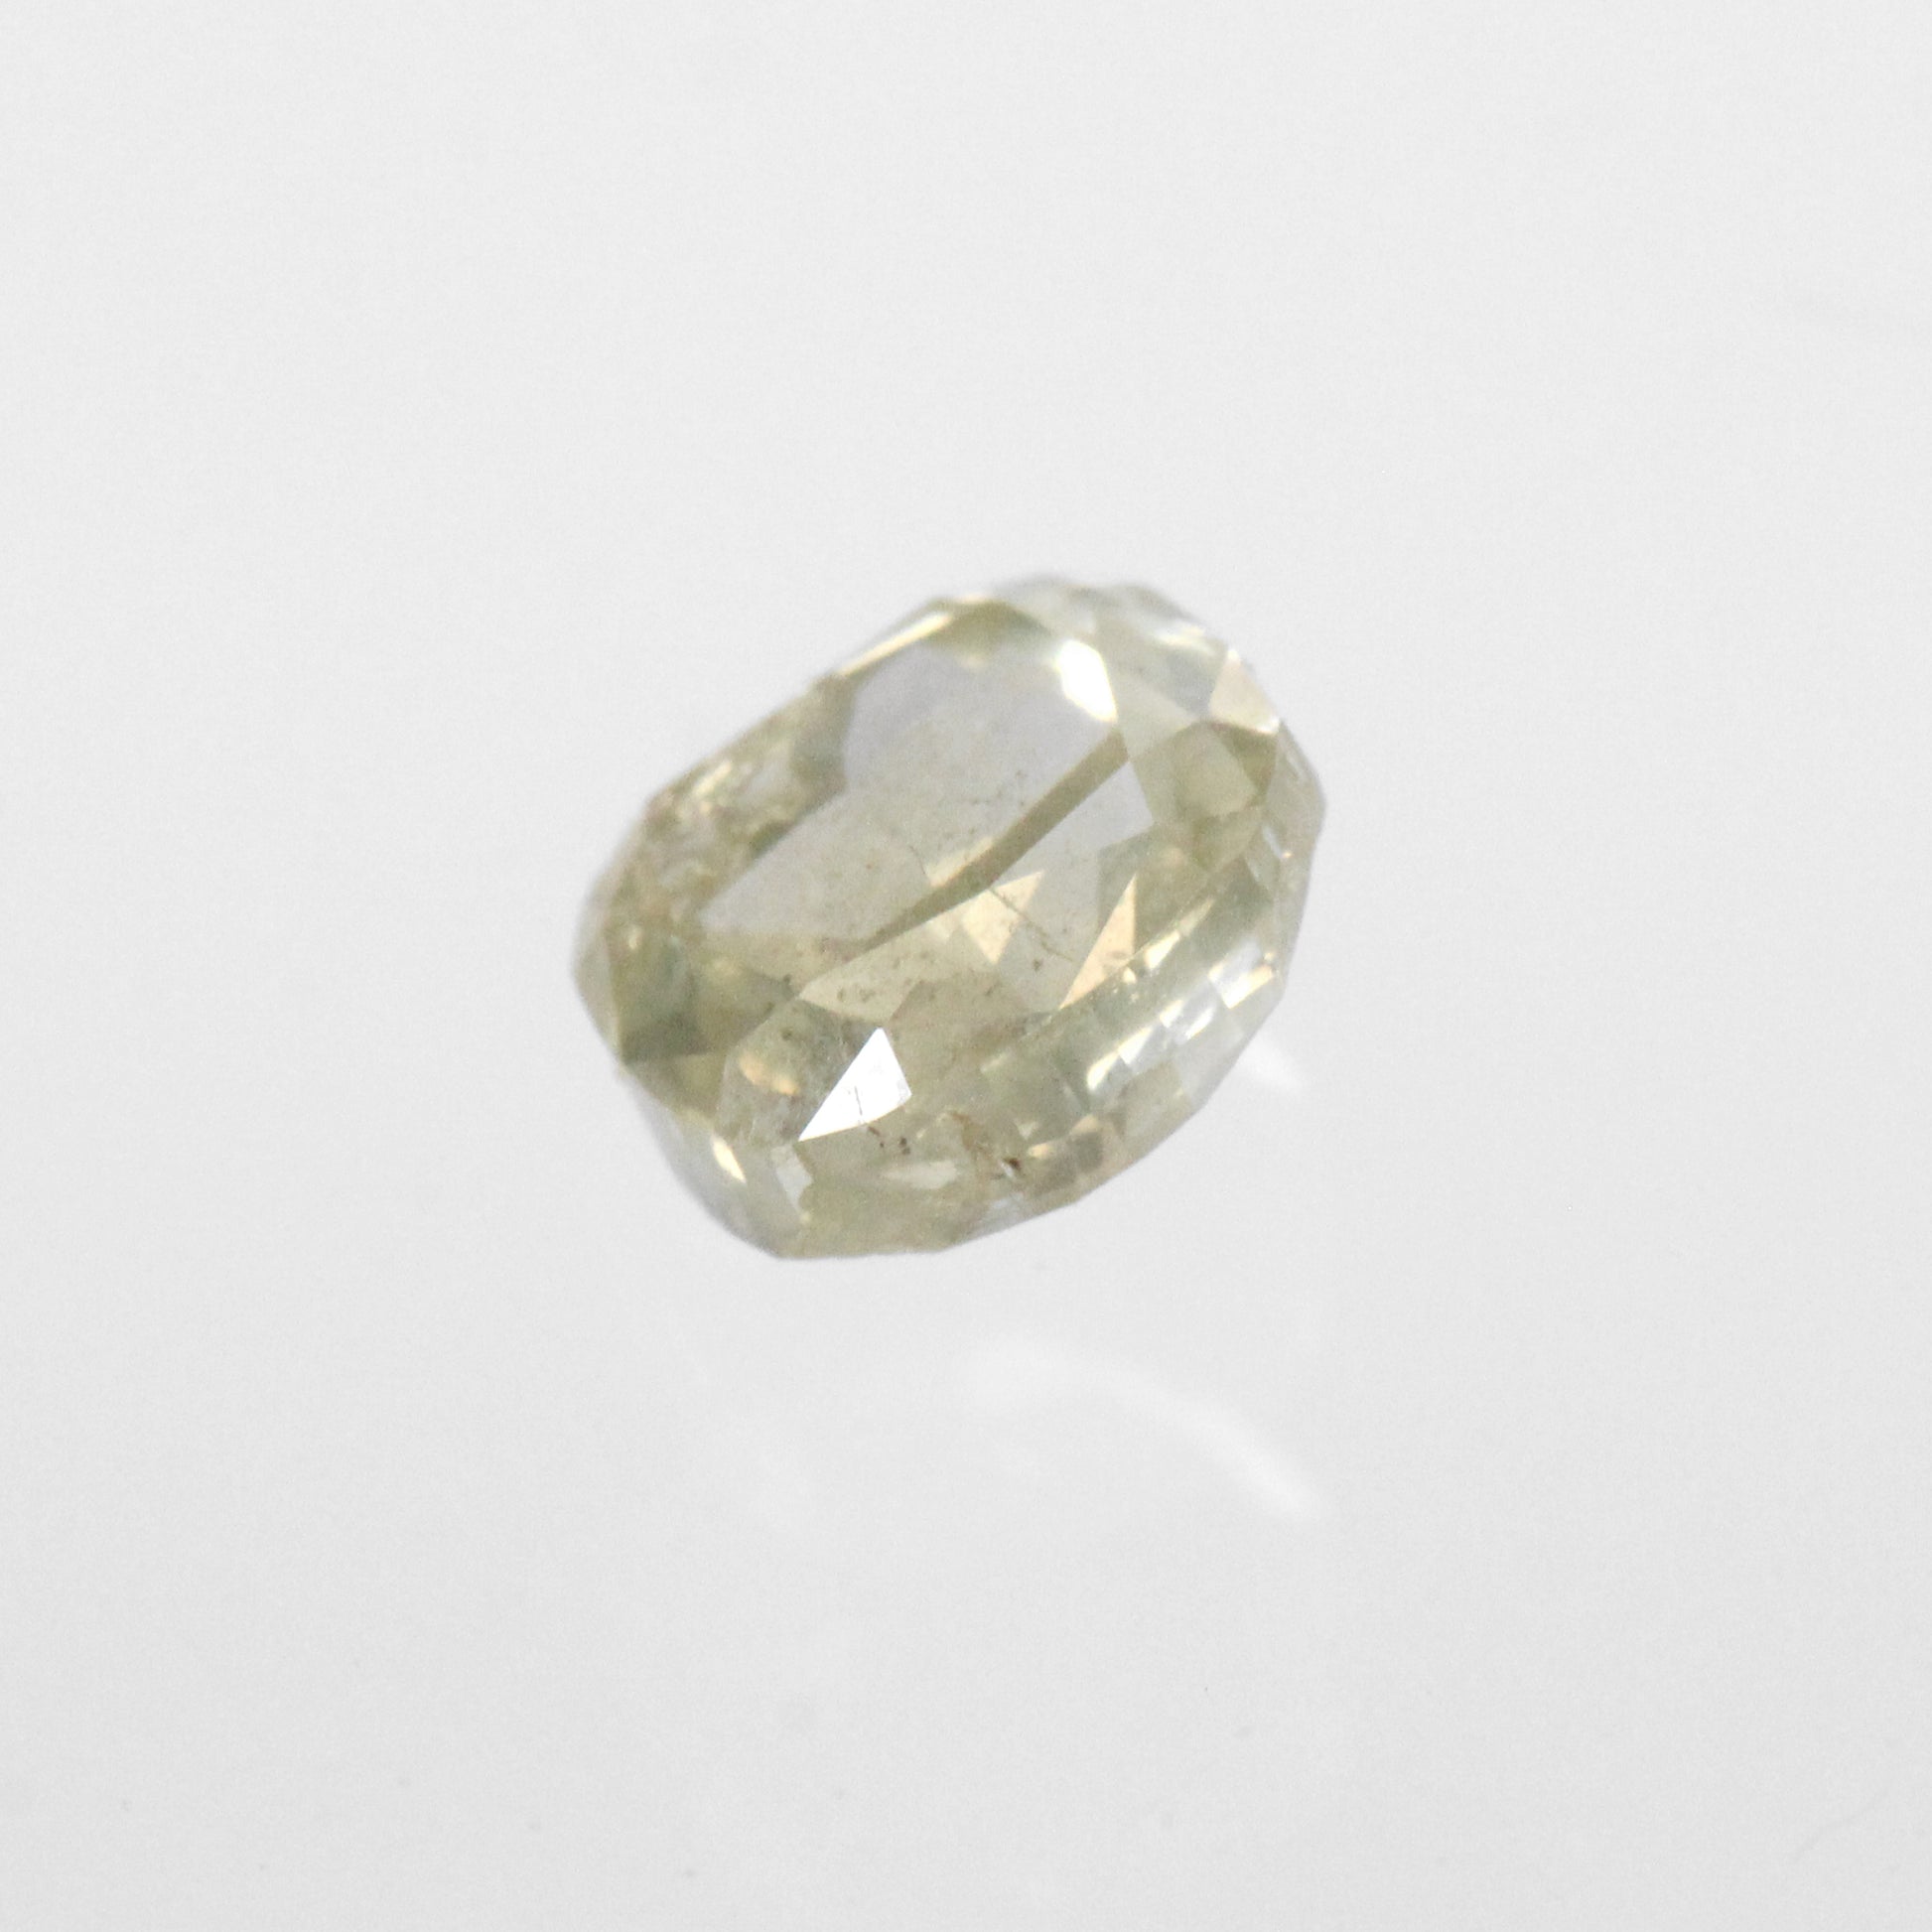 1.01 carat natural cushion celestial diamond for custom work - inventory code CCC101 - Midwinter Co. Alternative Bridal Rings and Modern Fine Jewelry